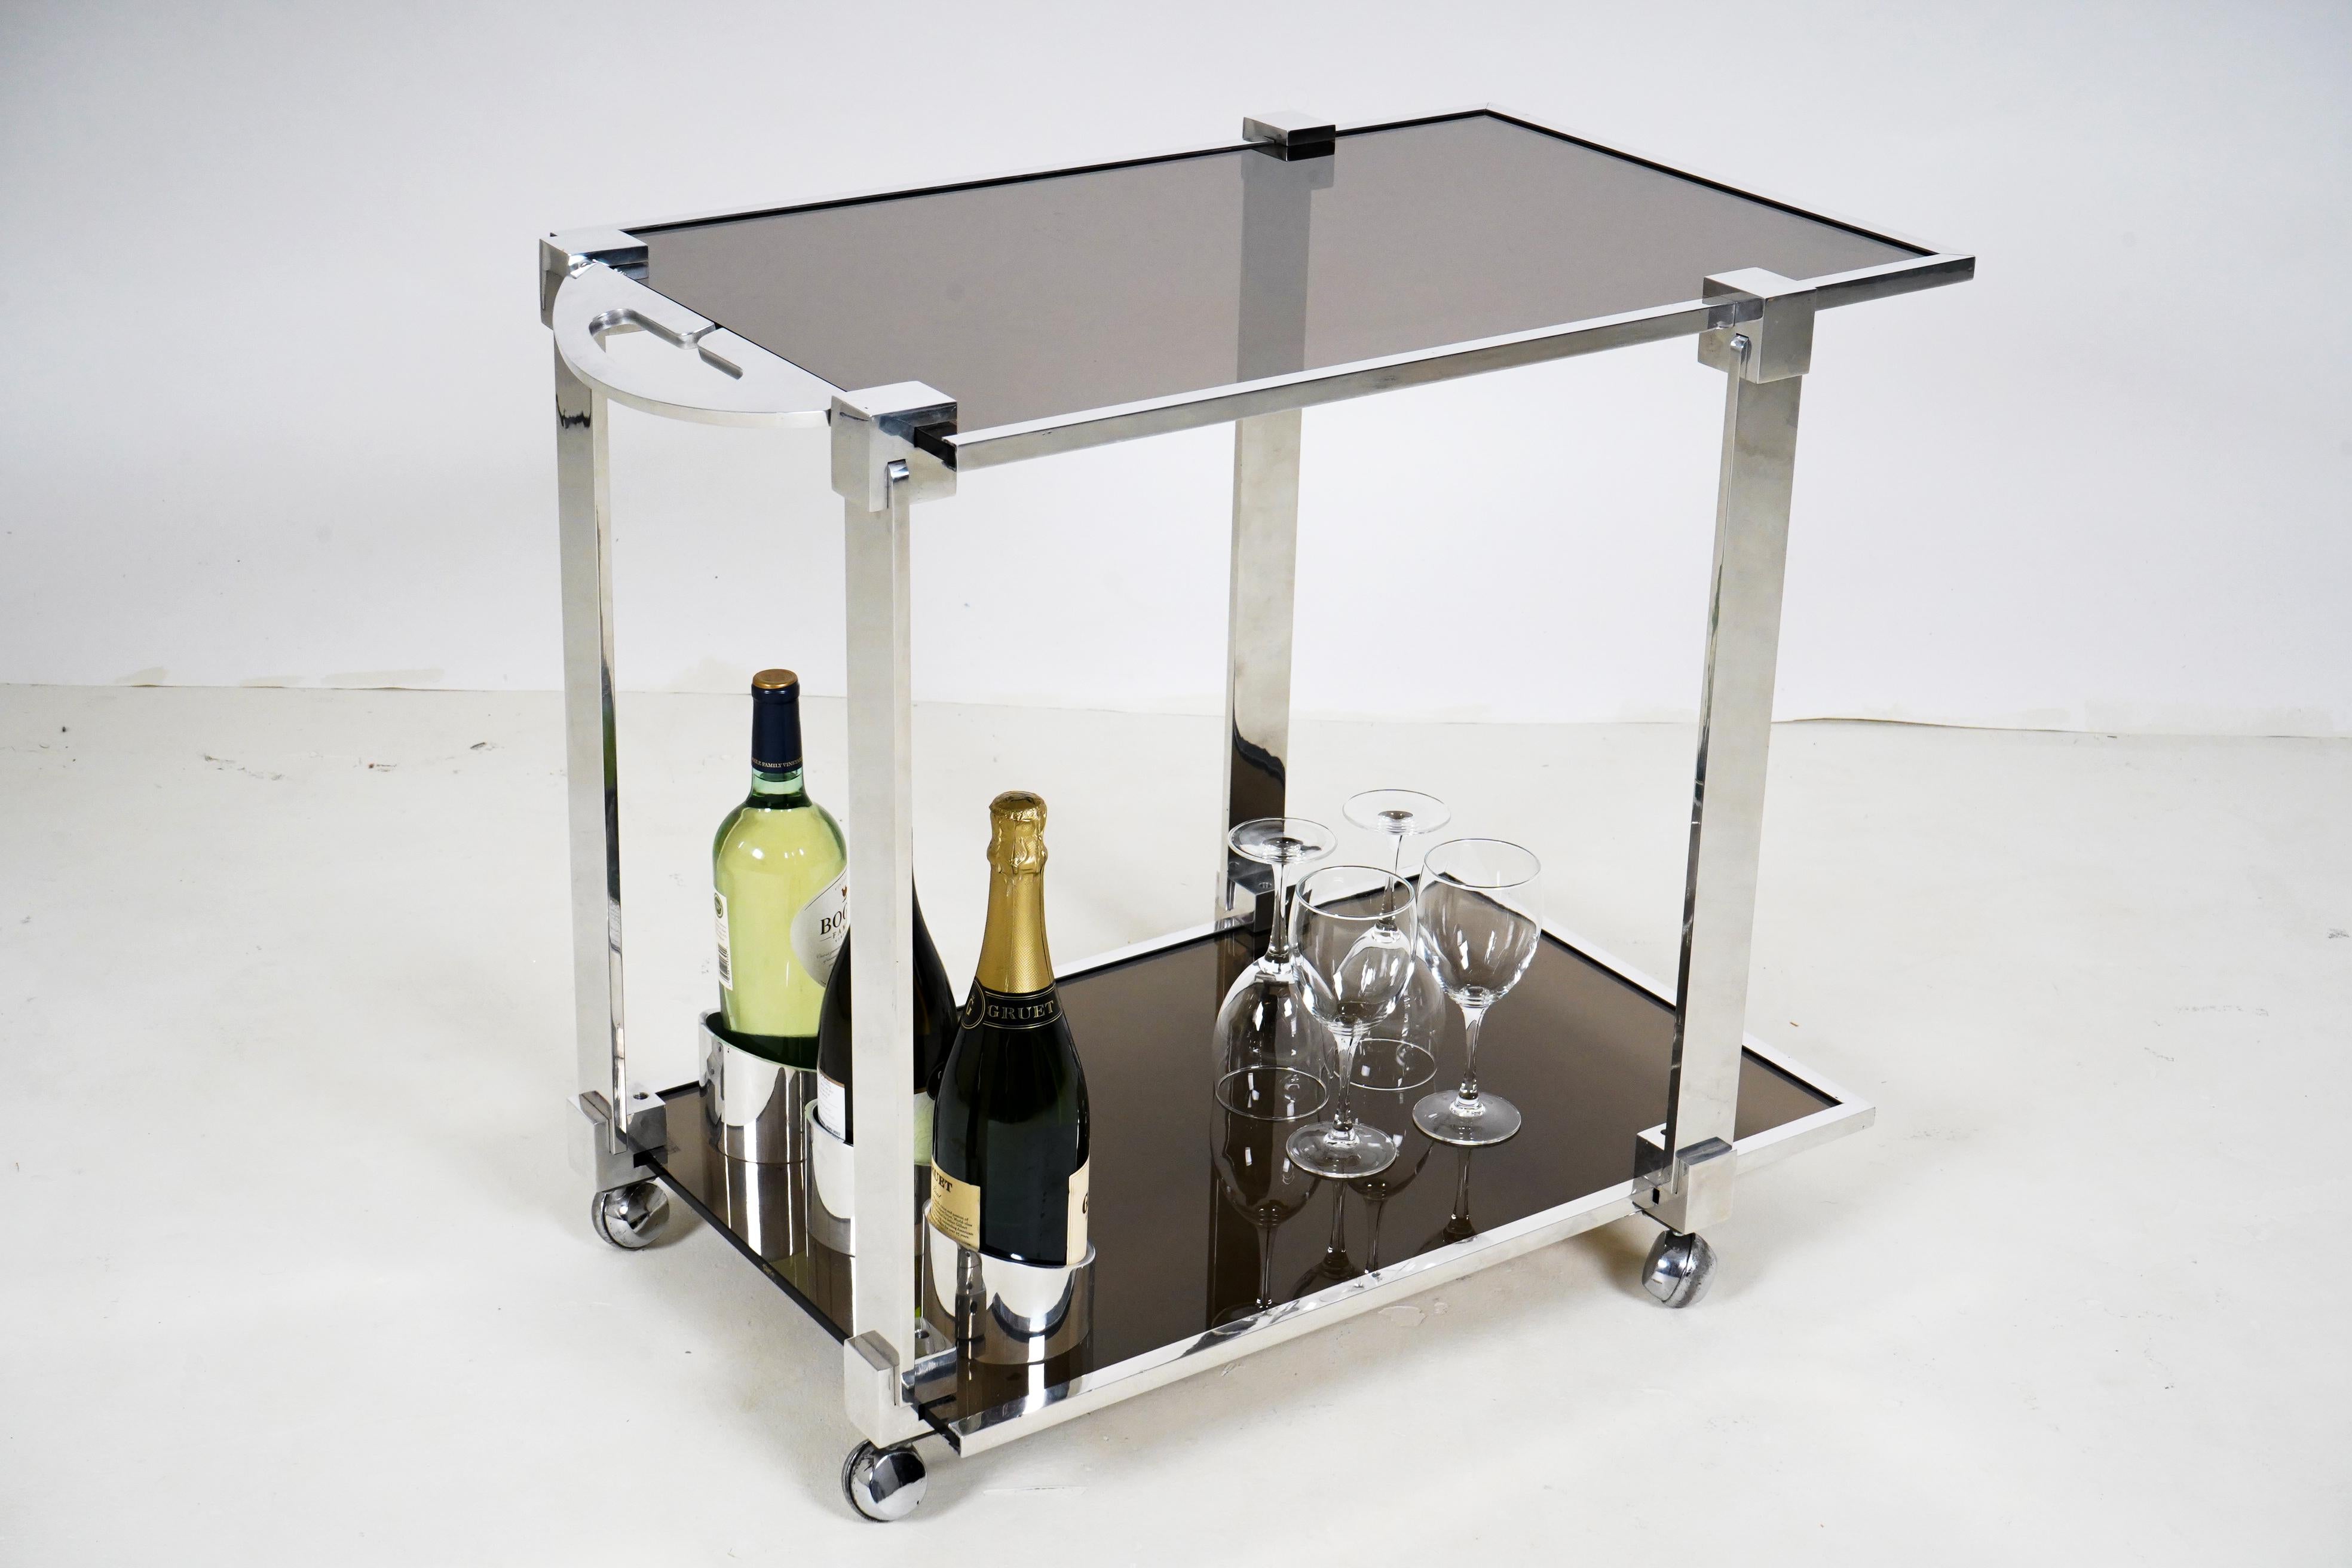 This 1970s chic chrome bar cart has two levels for storage and serving area and 3 bottle holders, also chromed. The top and bottom shelf are fitted with smoked glass, producing a piece that reproduces some of the glamor and style of interiors by